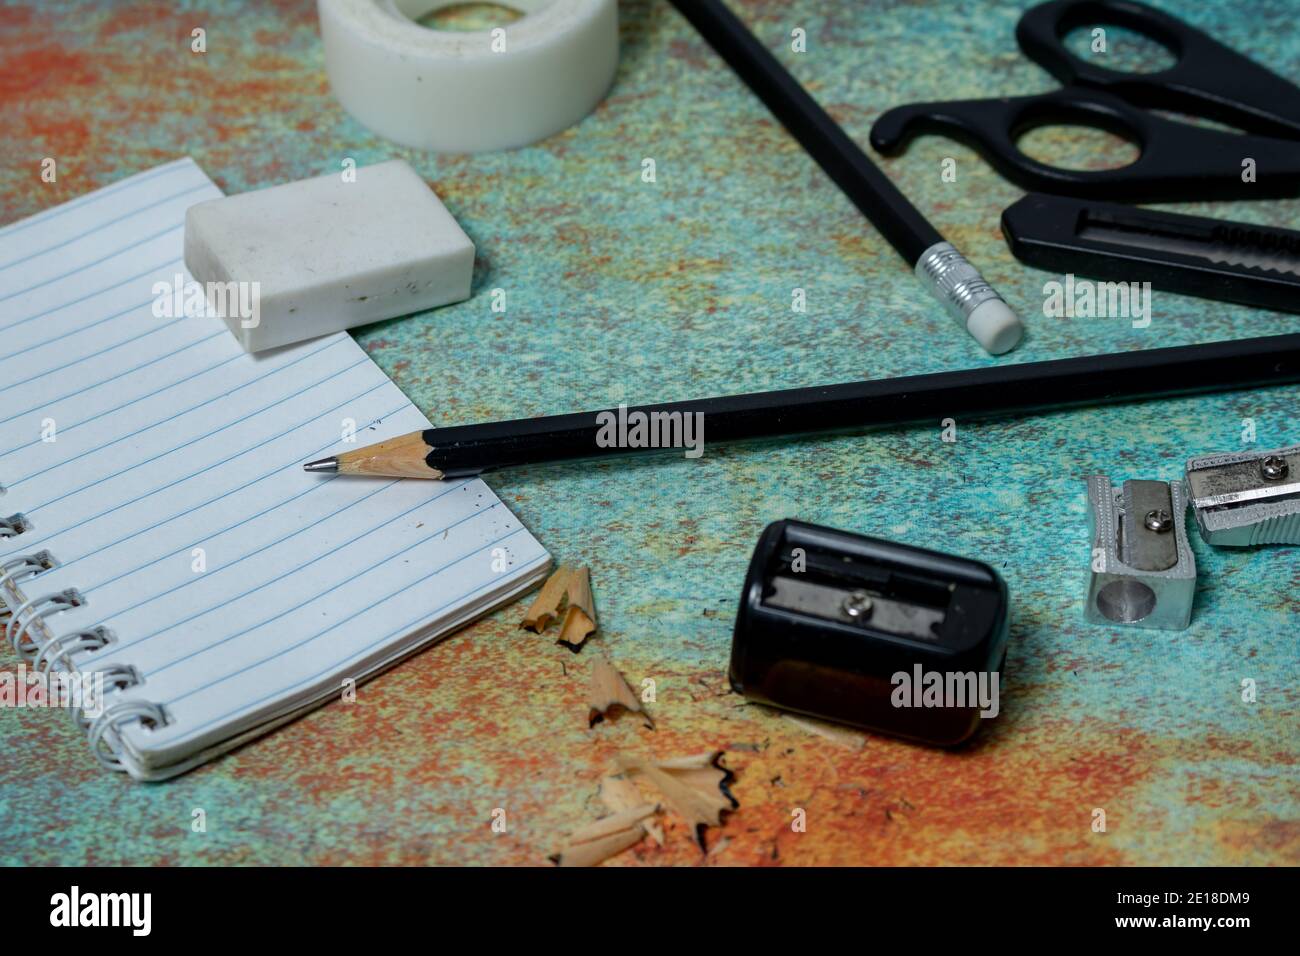 Small notebook, black pencil, eraser and other stationery on a rustic surface. Work items concept. Stock Photo